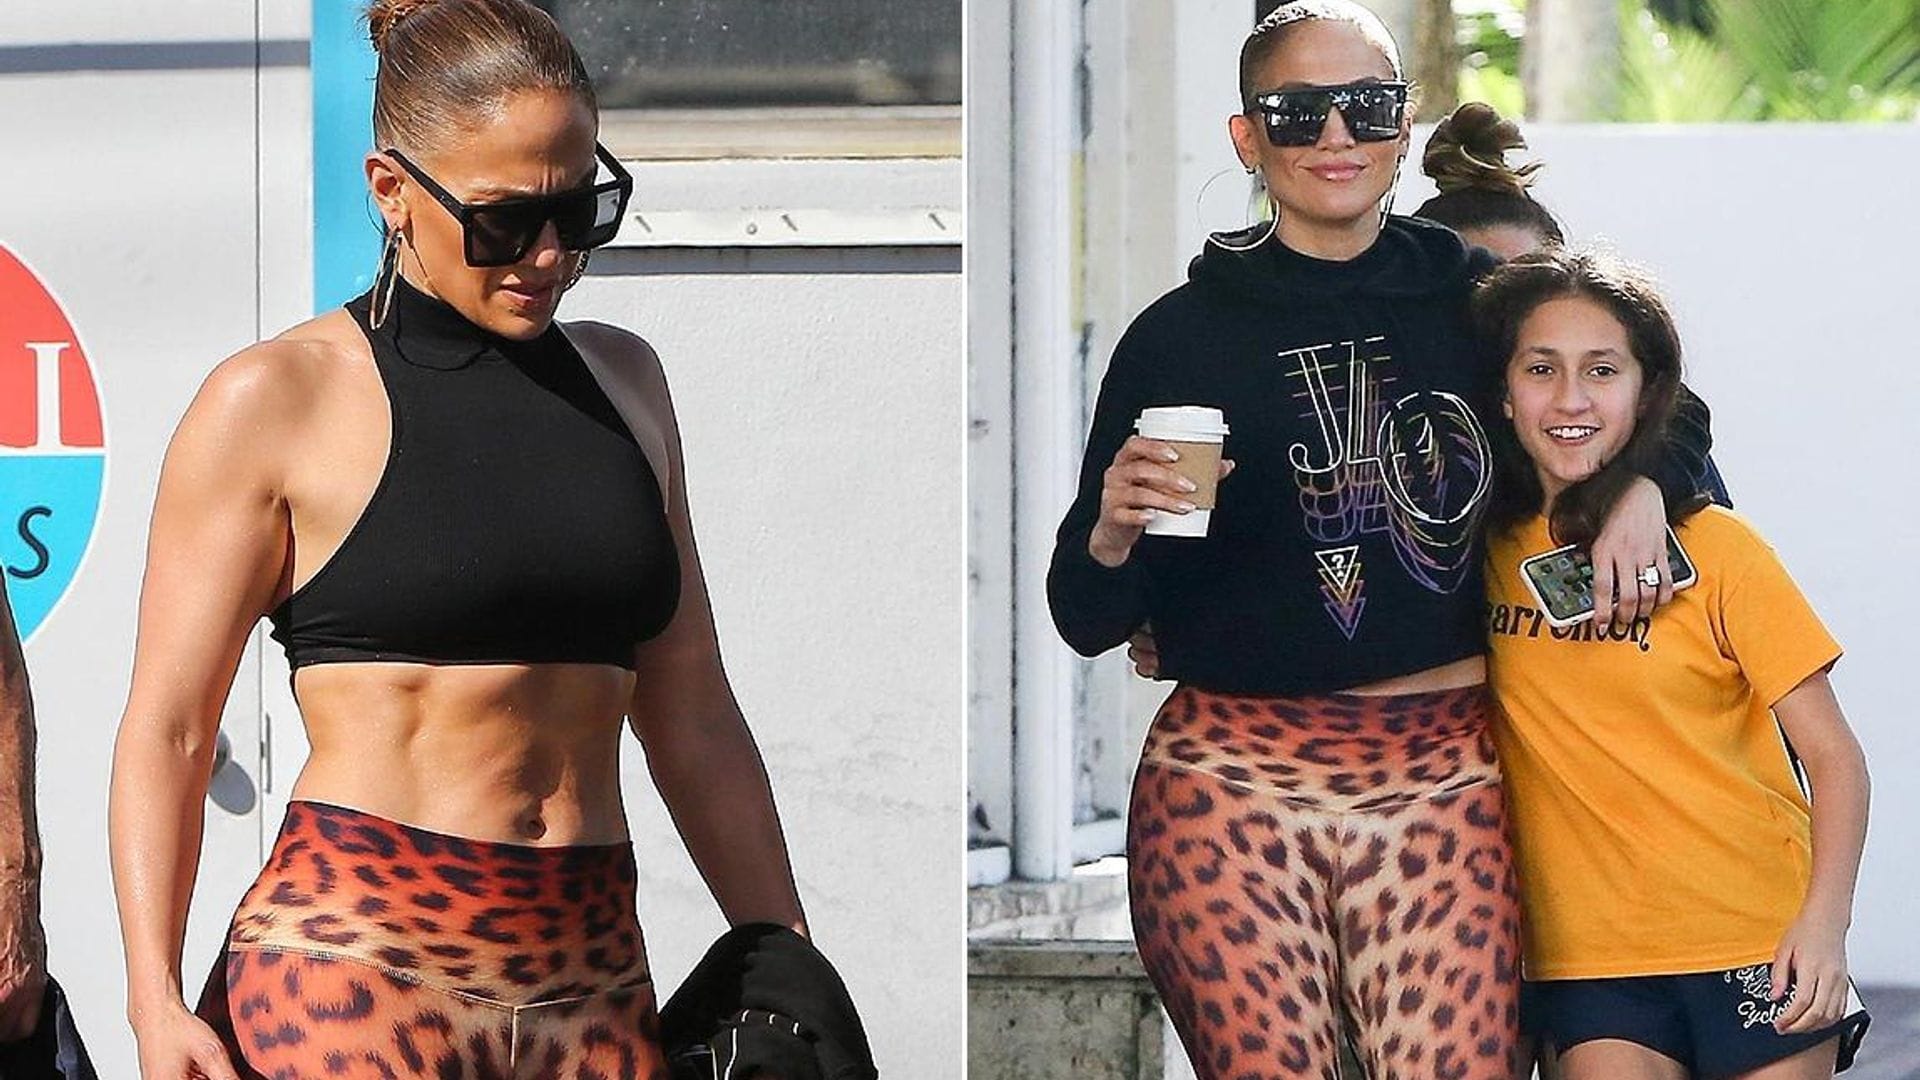 Jennifer Lopez shows off her abs during gym trip with daughter Emme